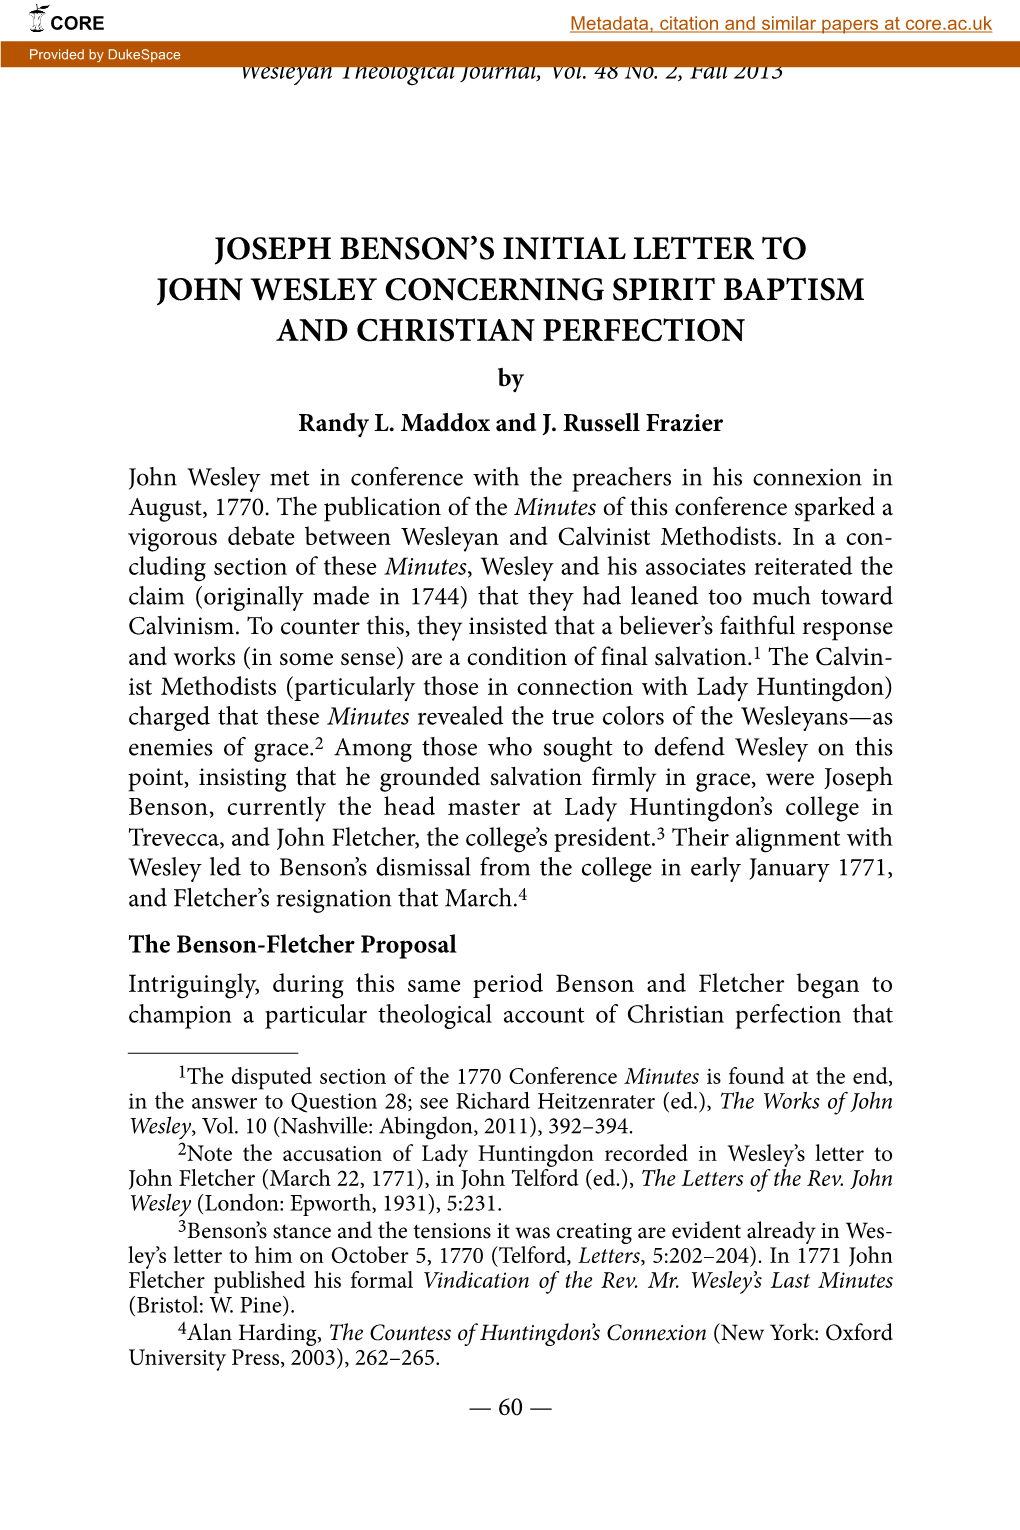 Joseph Benson's Initial Letter to John Wesley Concerning Spirit Baptism and Christian Perfection